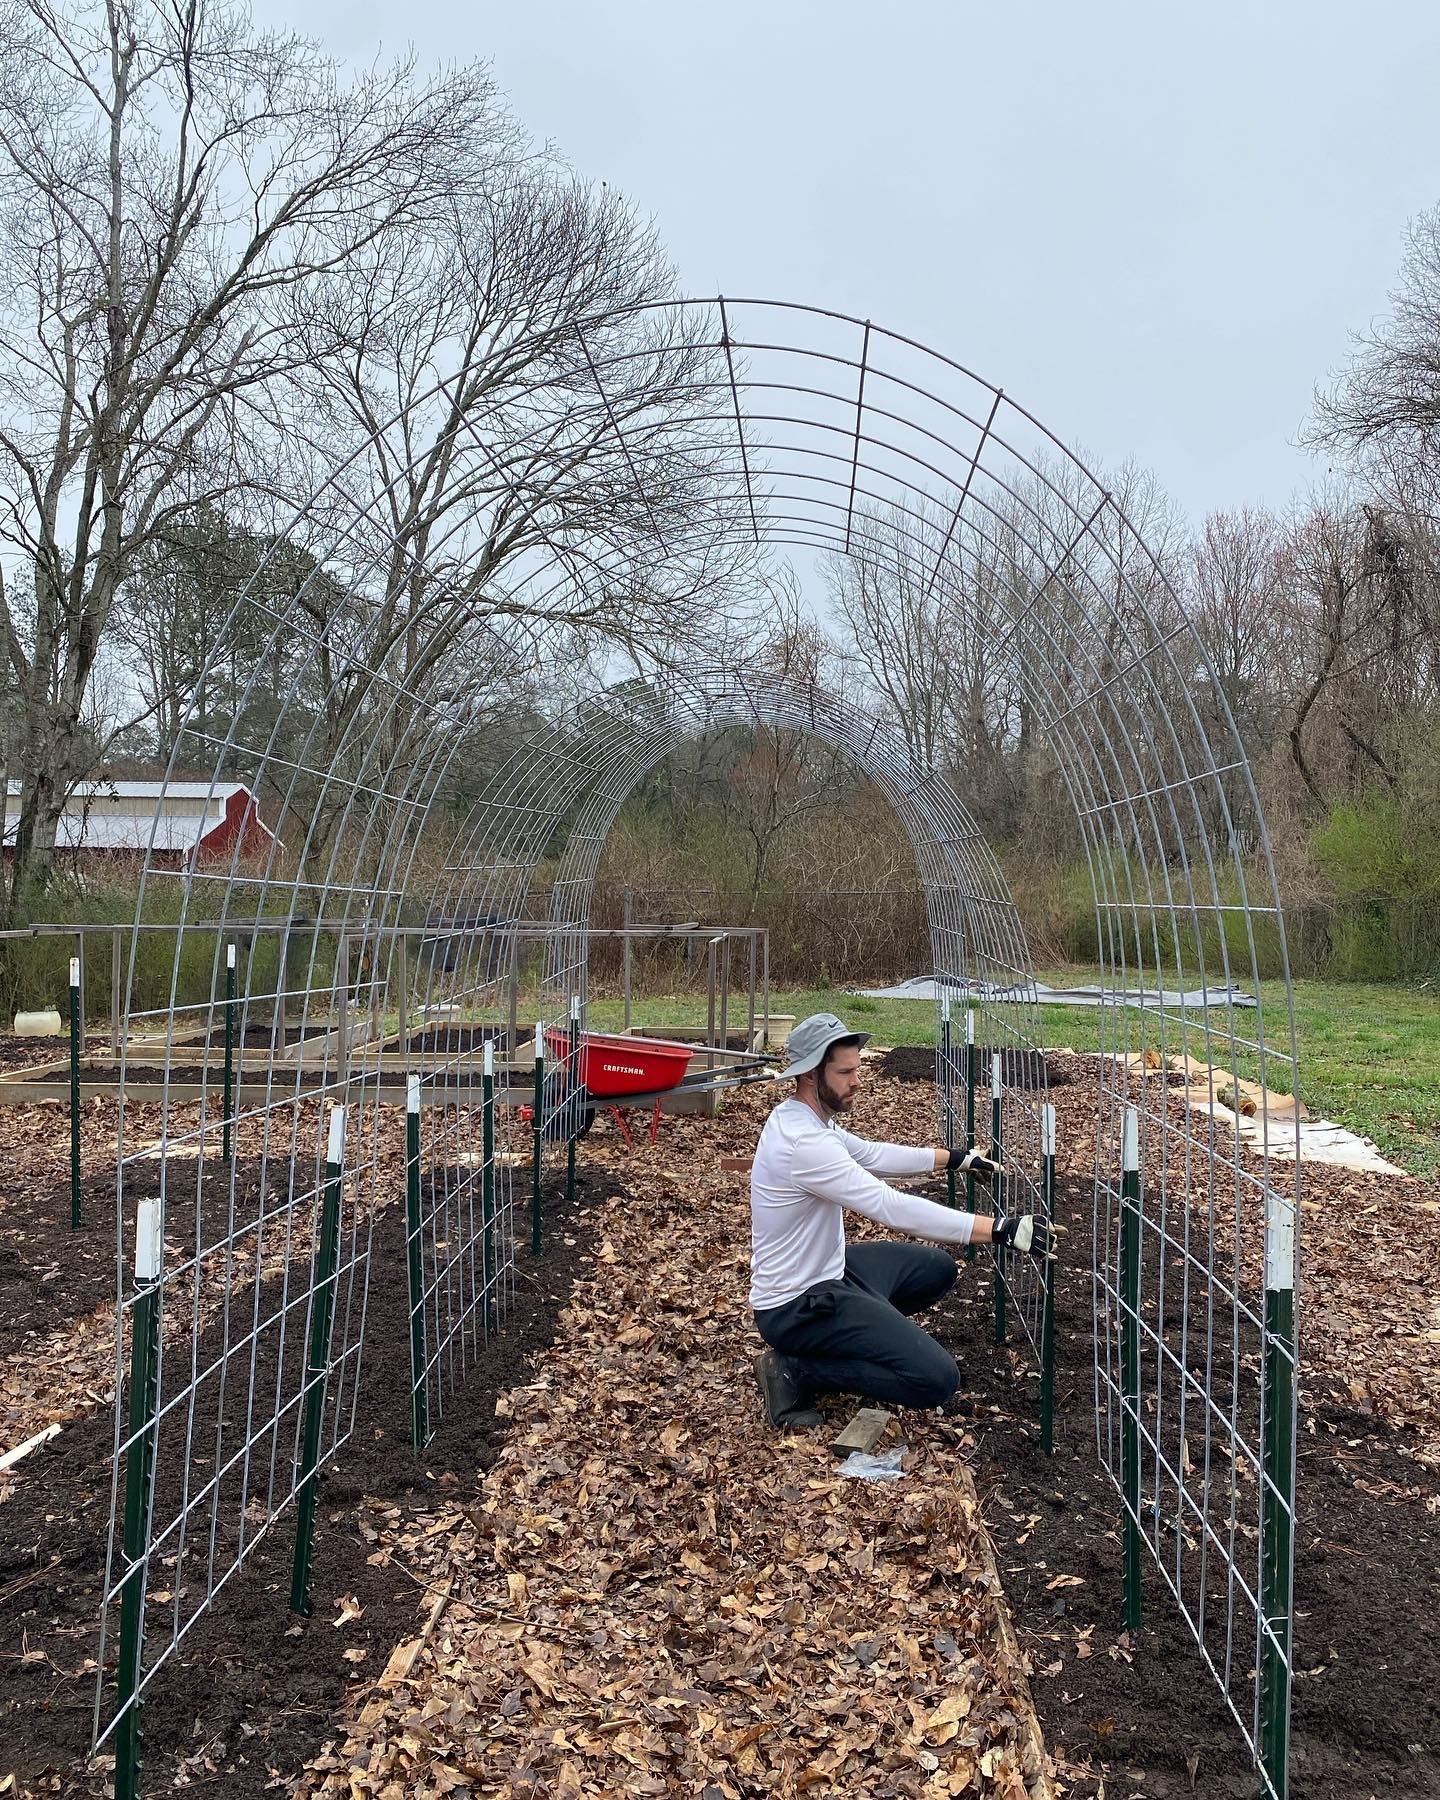 Arched trellis 👌🏾

Slowly but surely the garden vision is being realized!! Yesterday was a work day at Philo and we got a lot done! Not pictured, the hoops for our low tunnels for the cutting garden 🌺

Thankful for this man and all we get to build